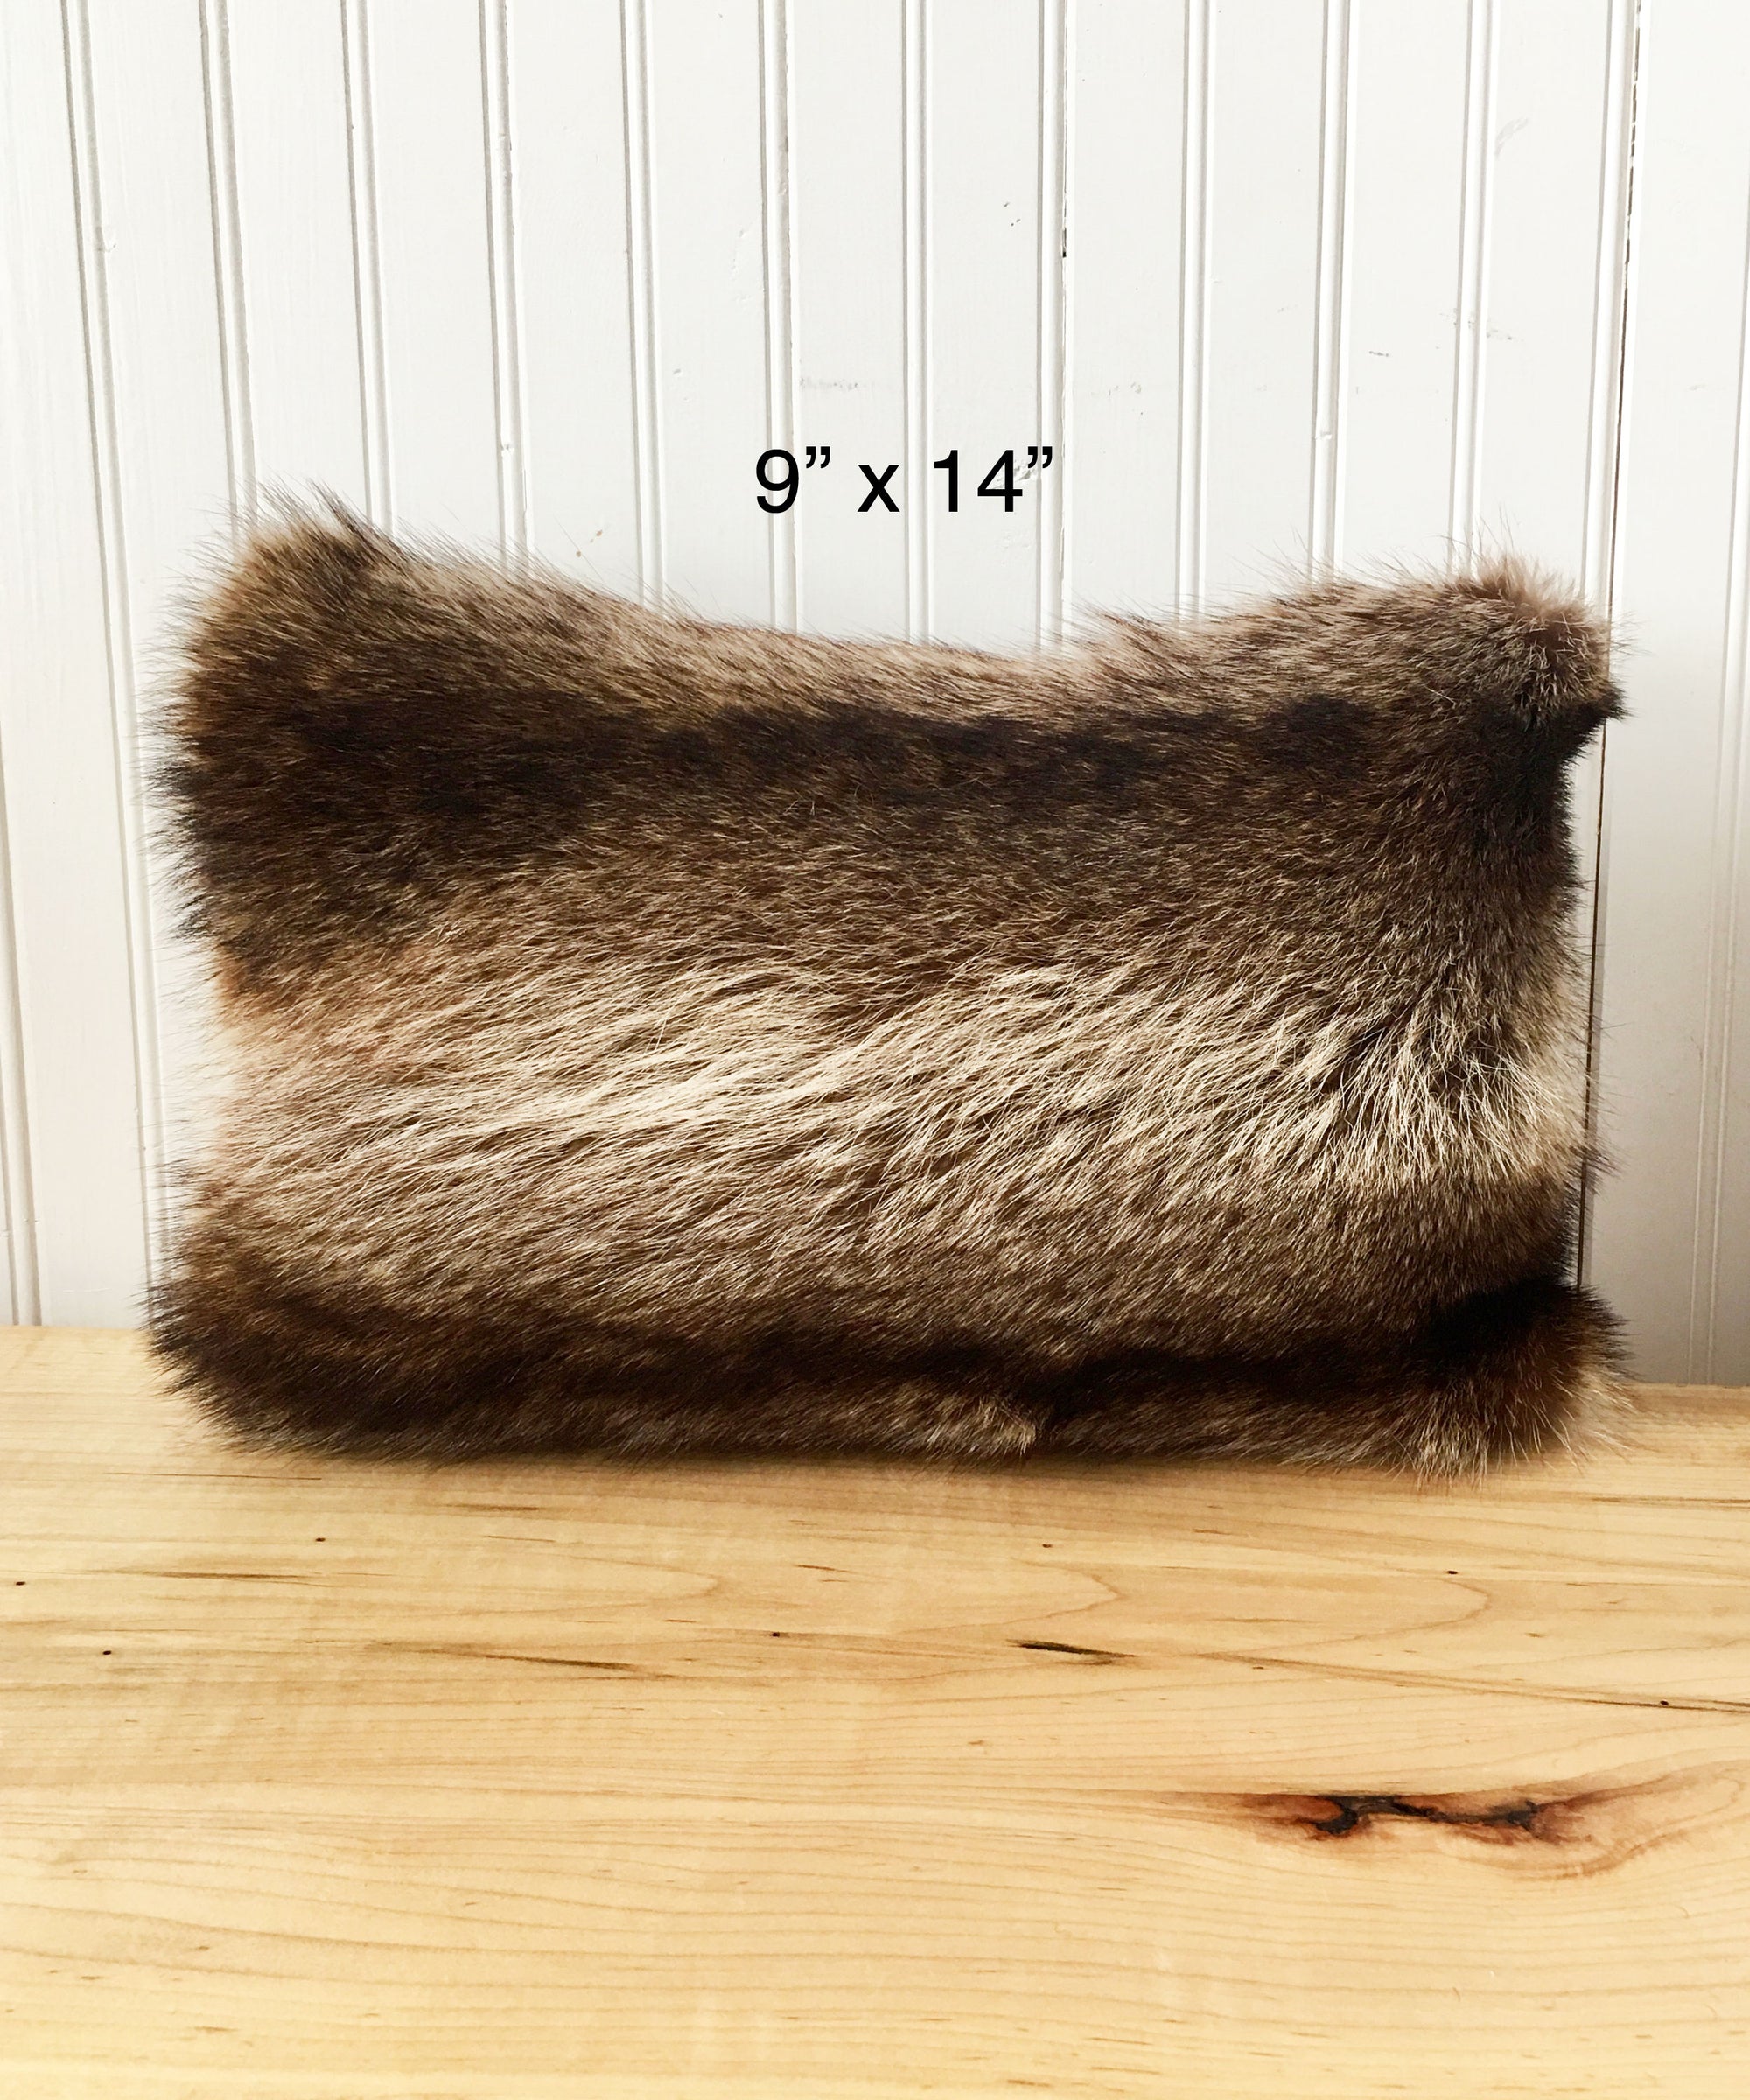 Raccoon Fur Accent Pillows, 11" x 17" and 9" x 14"